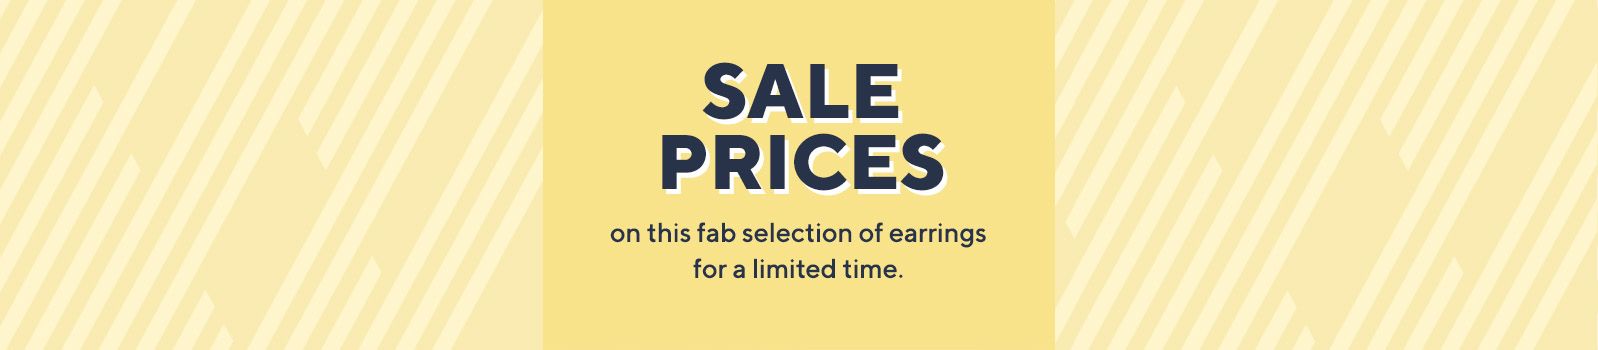 Sale Prices on this fab selection of earrings for a limited time.